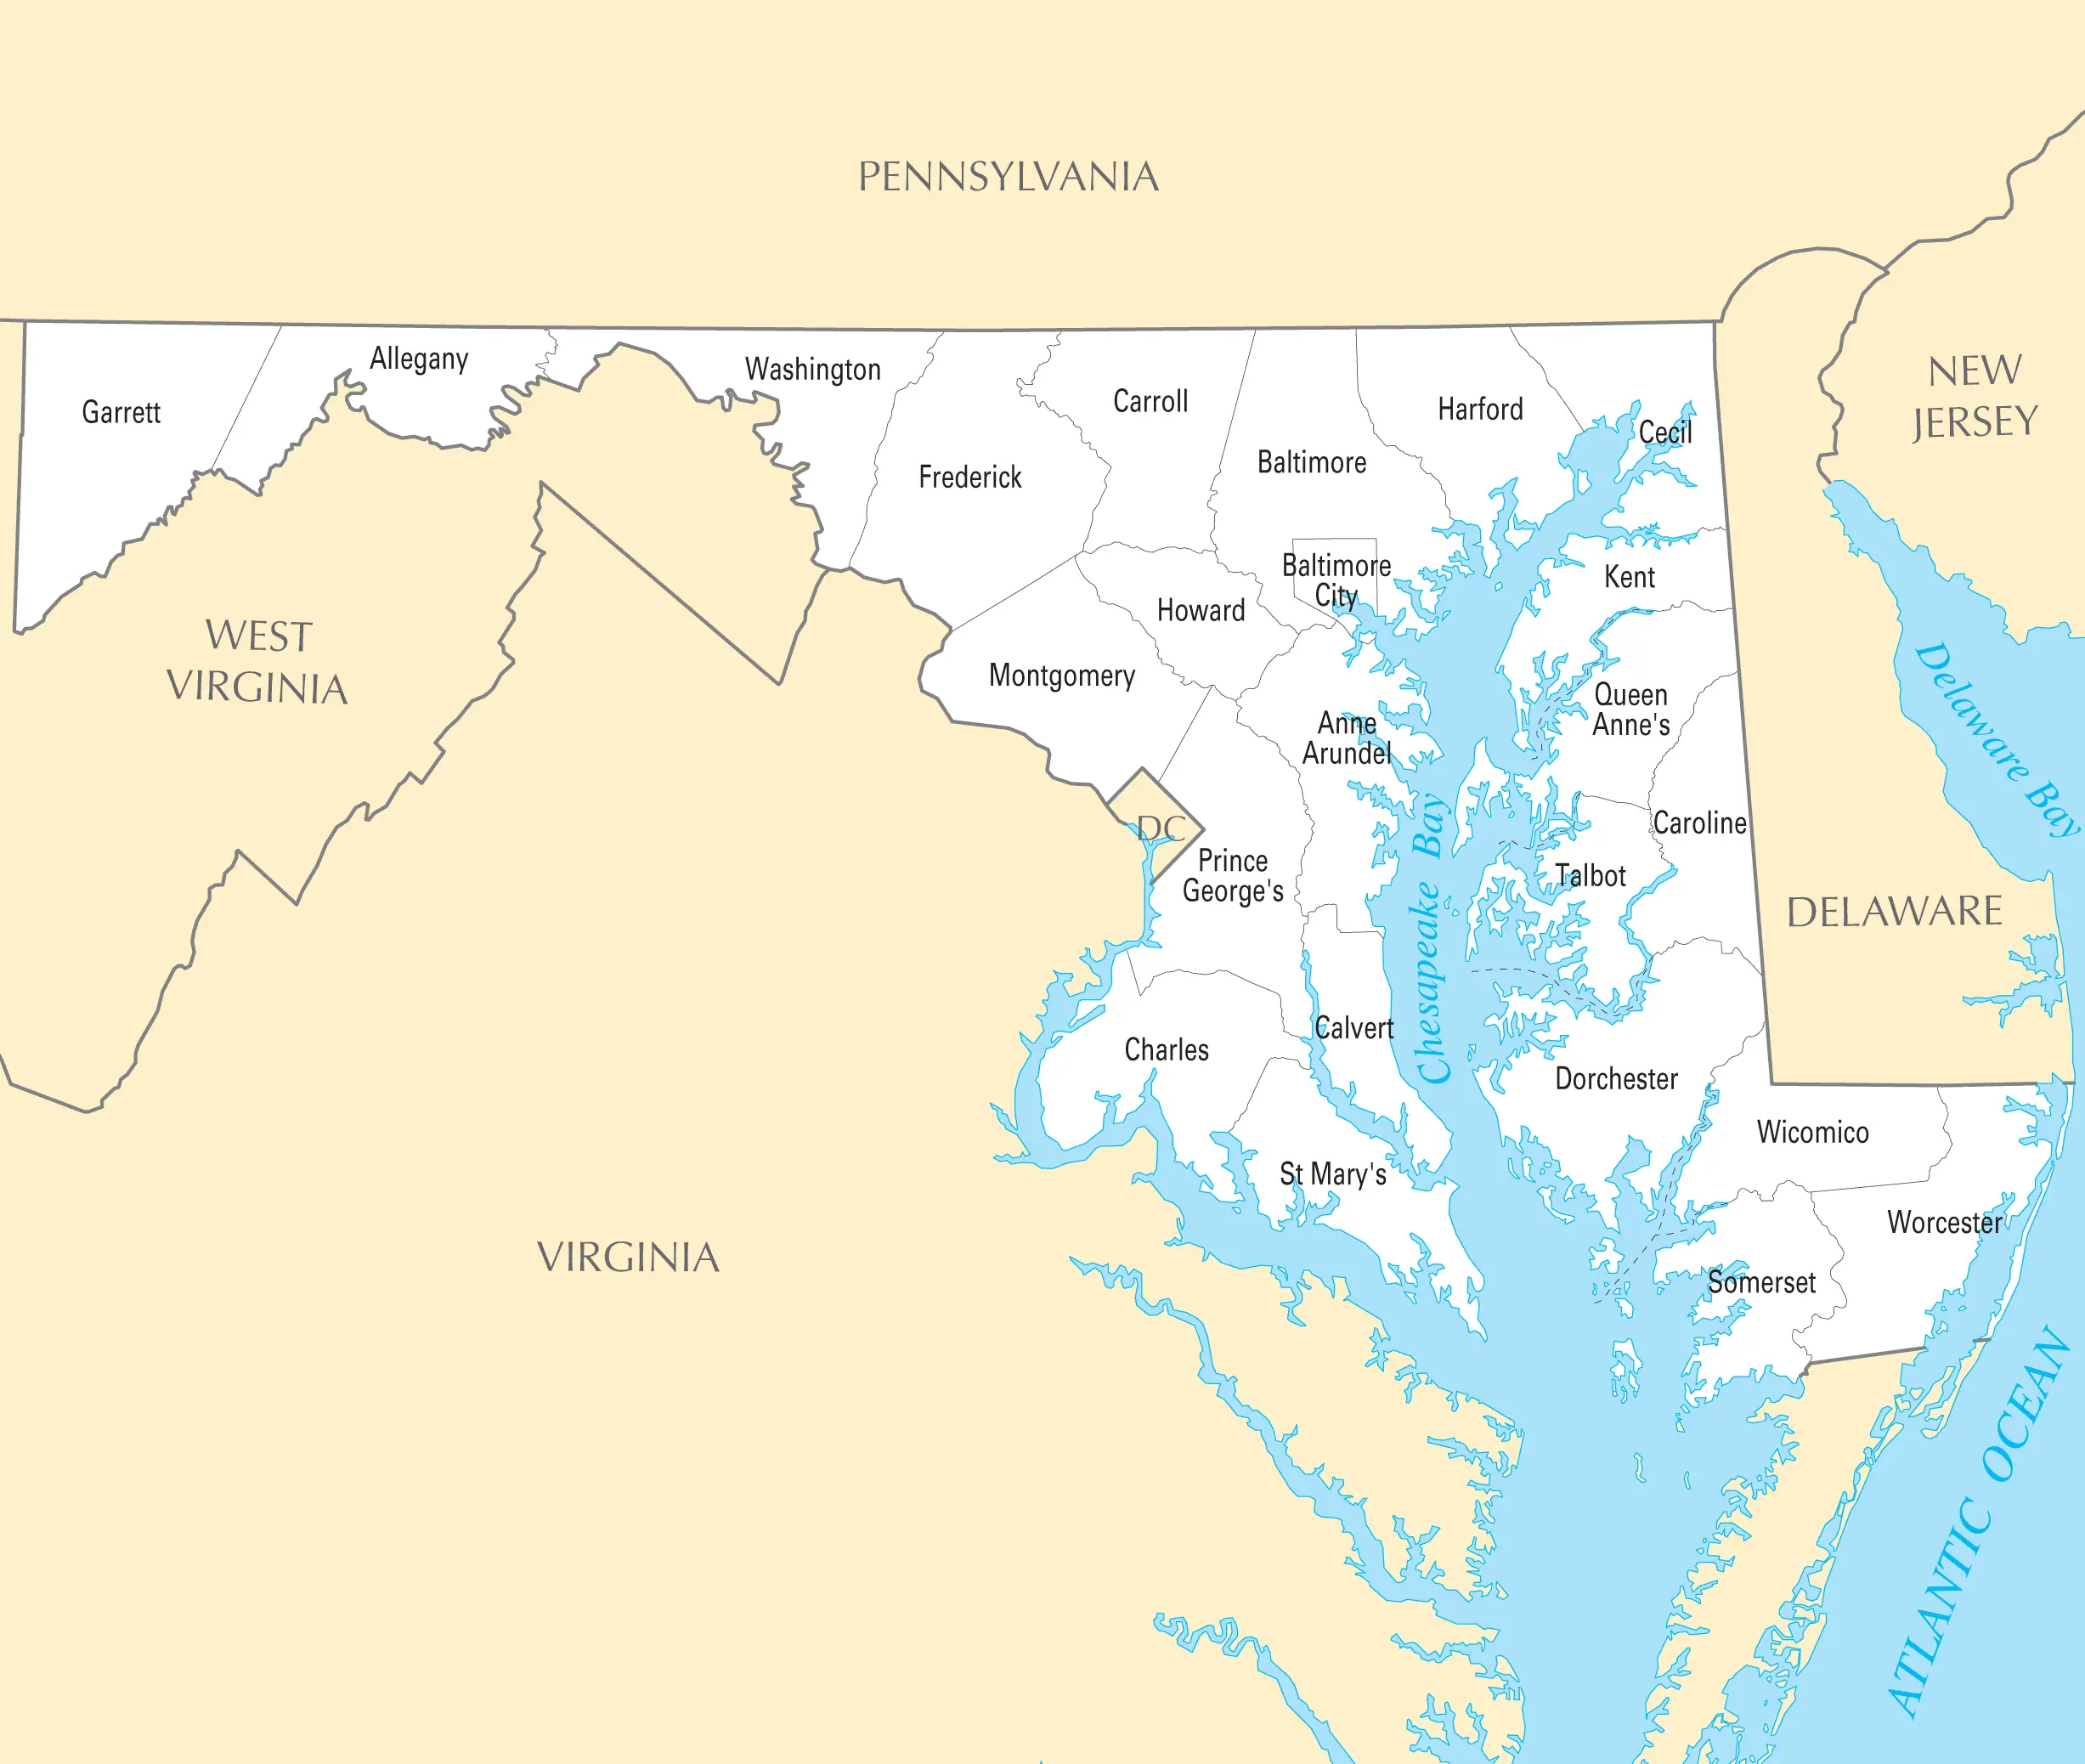 Maryland County Map